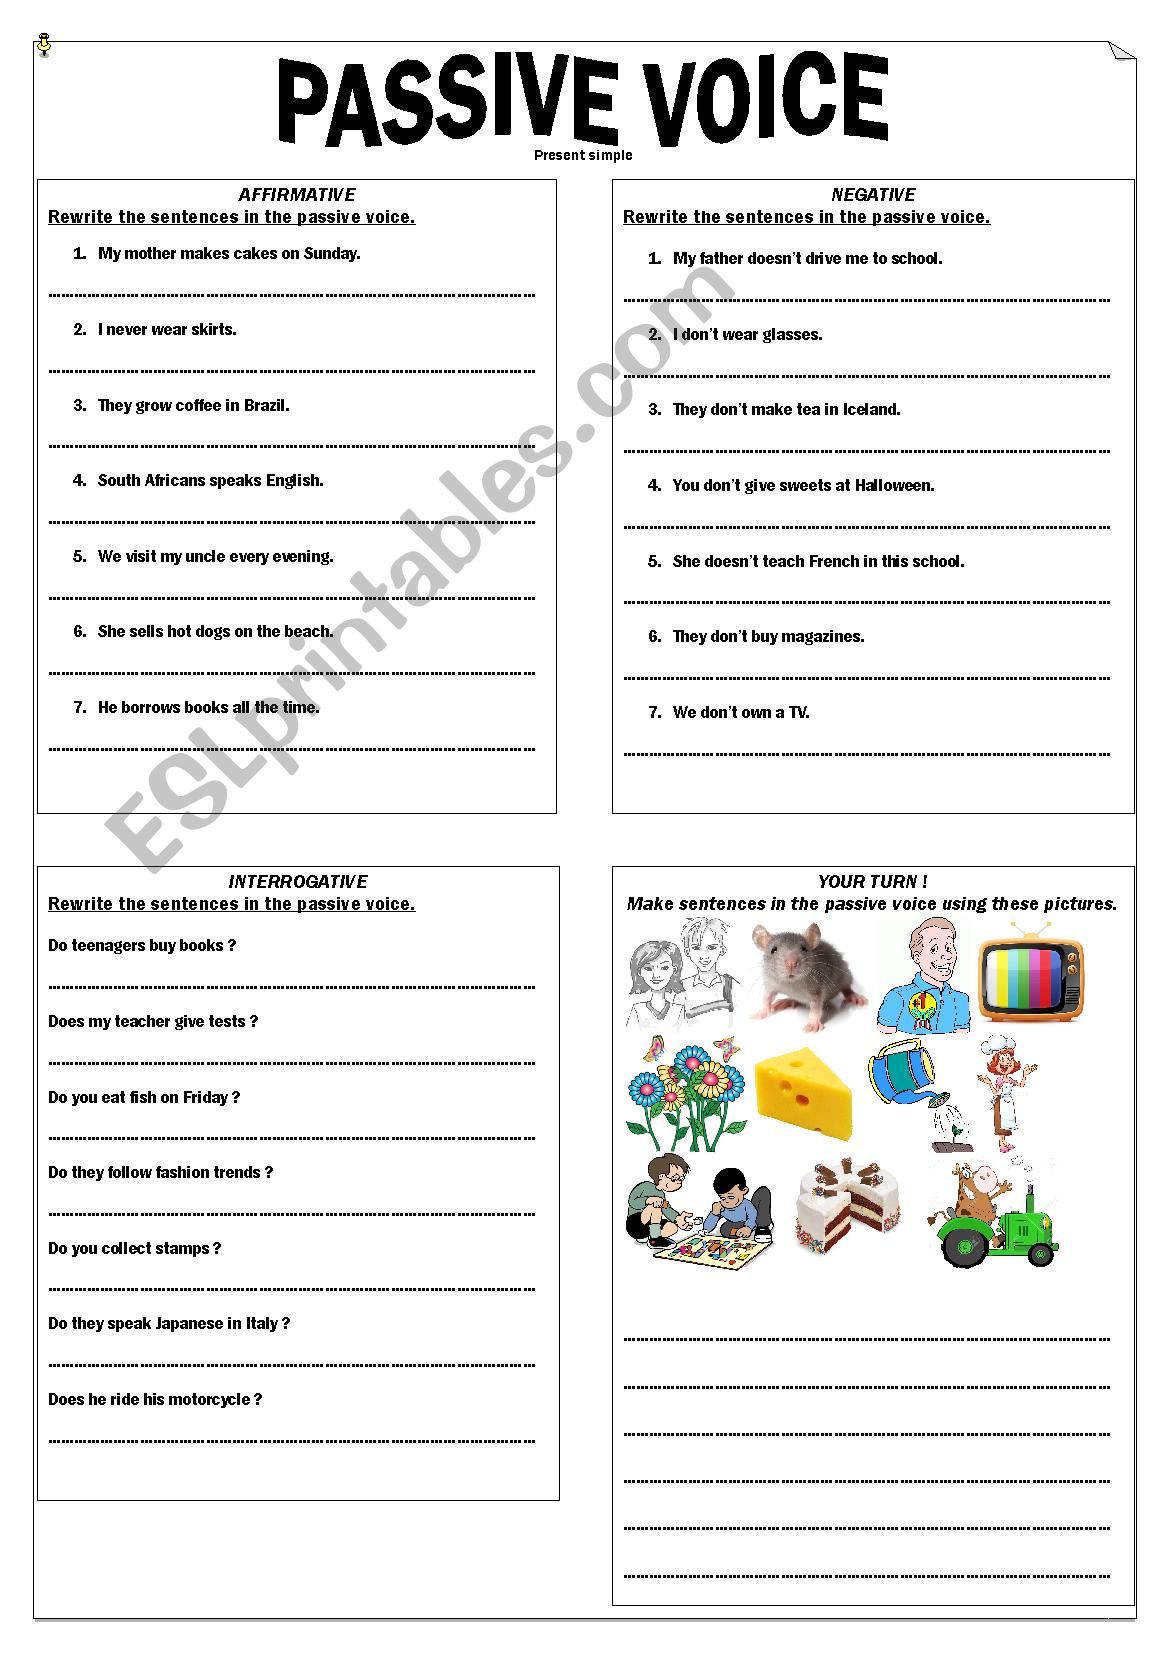 passive-voice-interactive-and-downloadable-worksheet-you-can-do-the